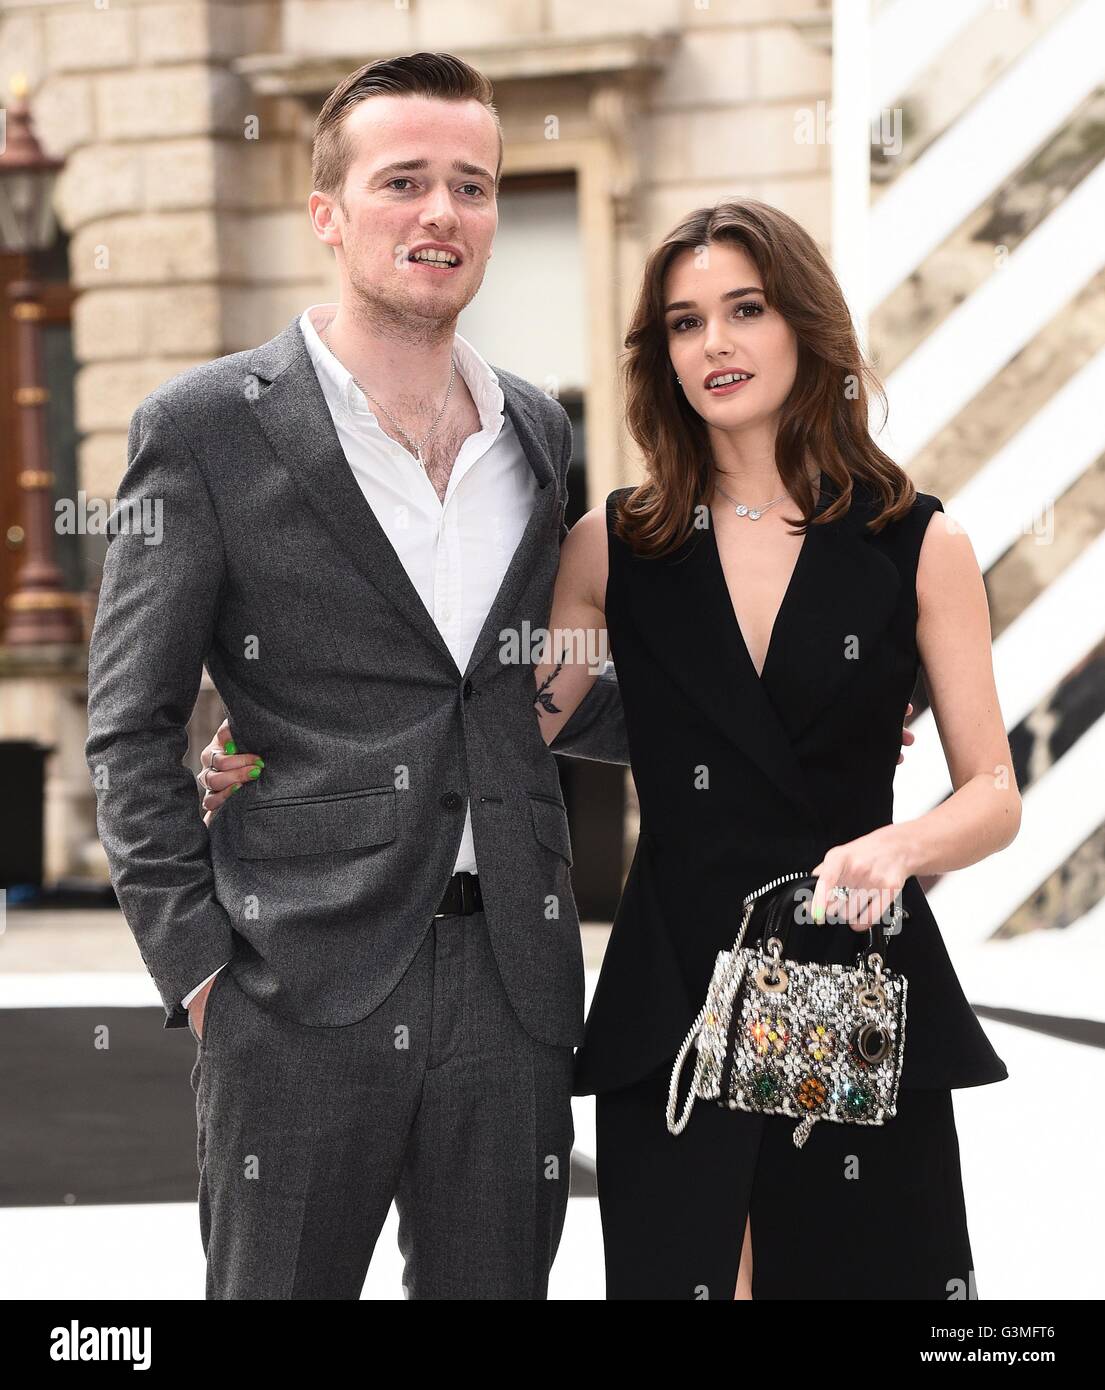 London, UK. Sai Bennett and Sam Doyle  at The Royal Academy Of Arts Summer Exhibition VIP Preview held at The Royal Academy Of Arts, Burlington House, Piccadilly, London on Tuesday 7 June 2016  Ref: LMK392 -60292-080616 Vivienne Vincent/Landmark Media.  WWW.LMKMEDIA.COM. Stock Photo